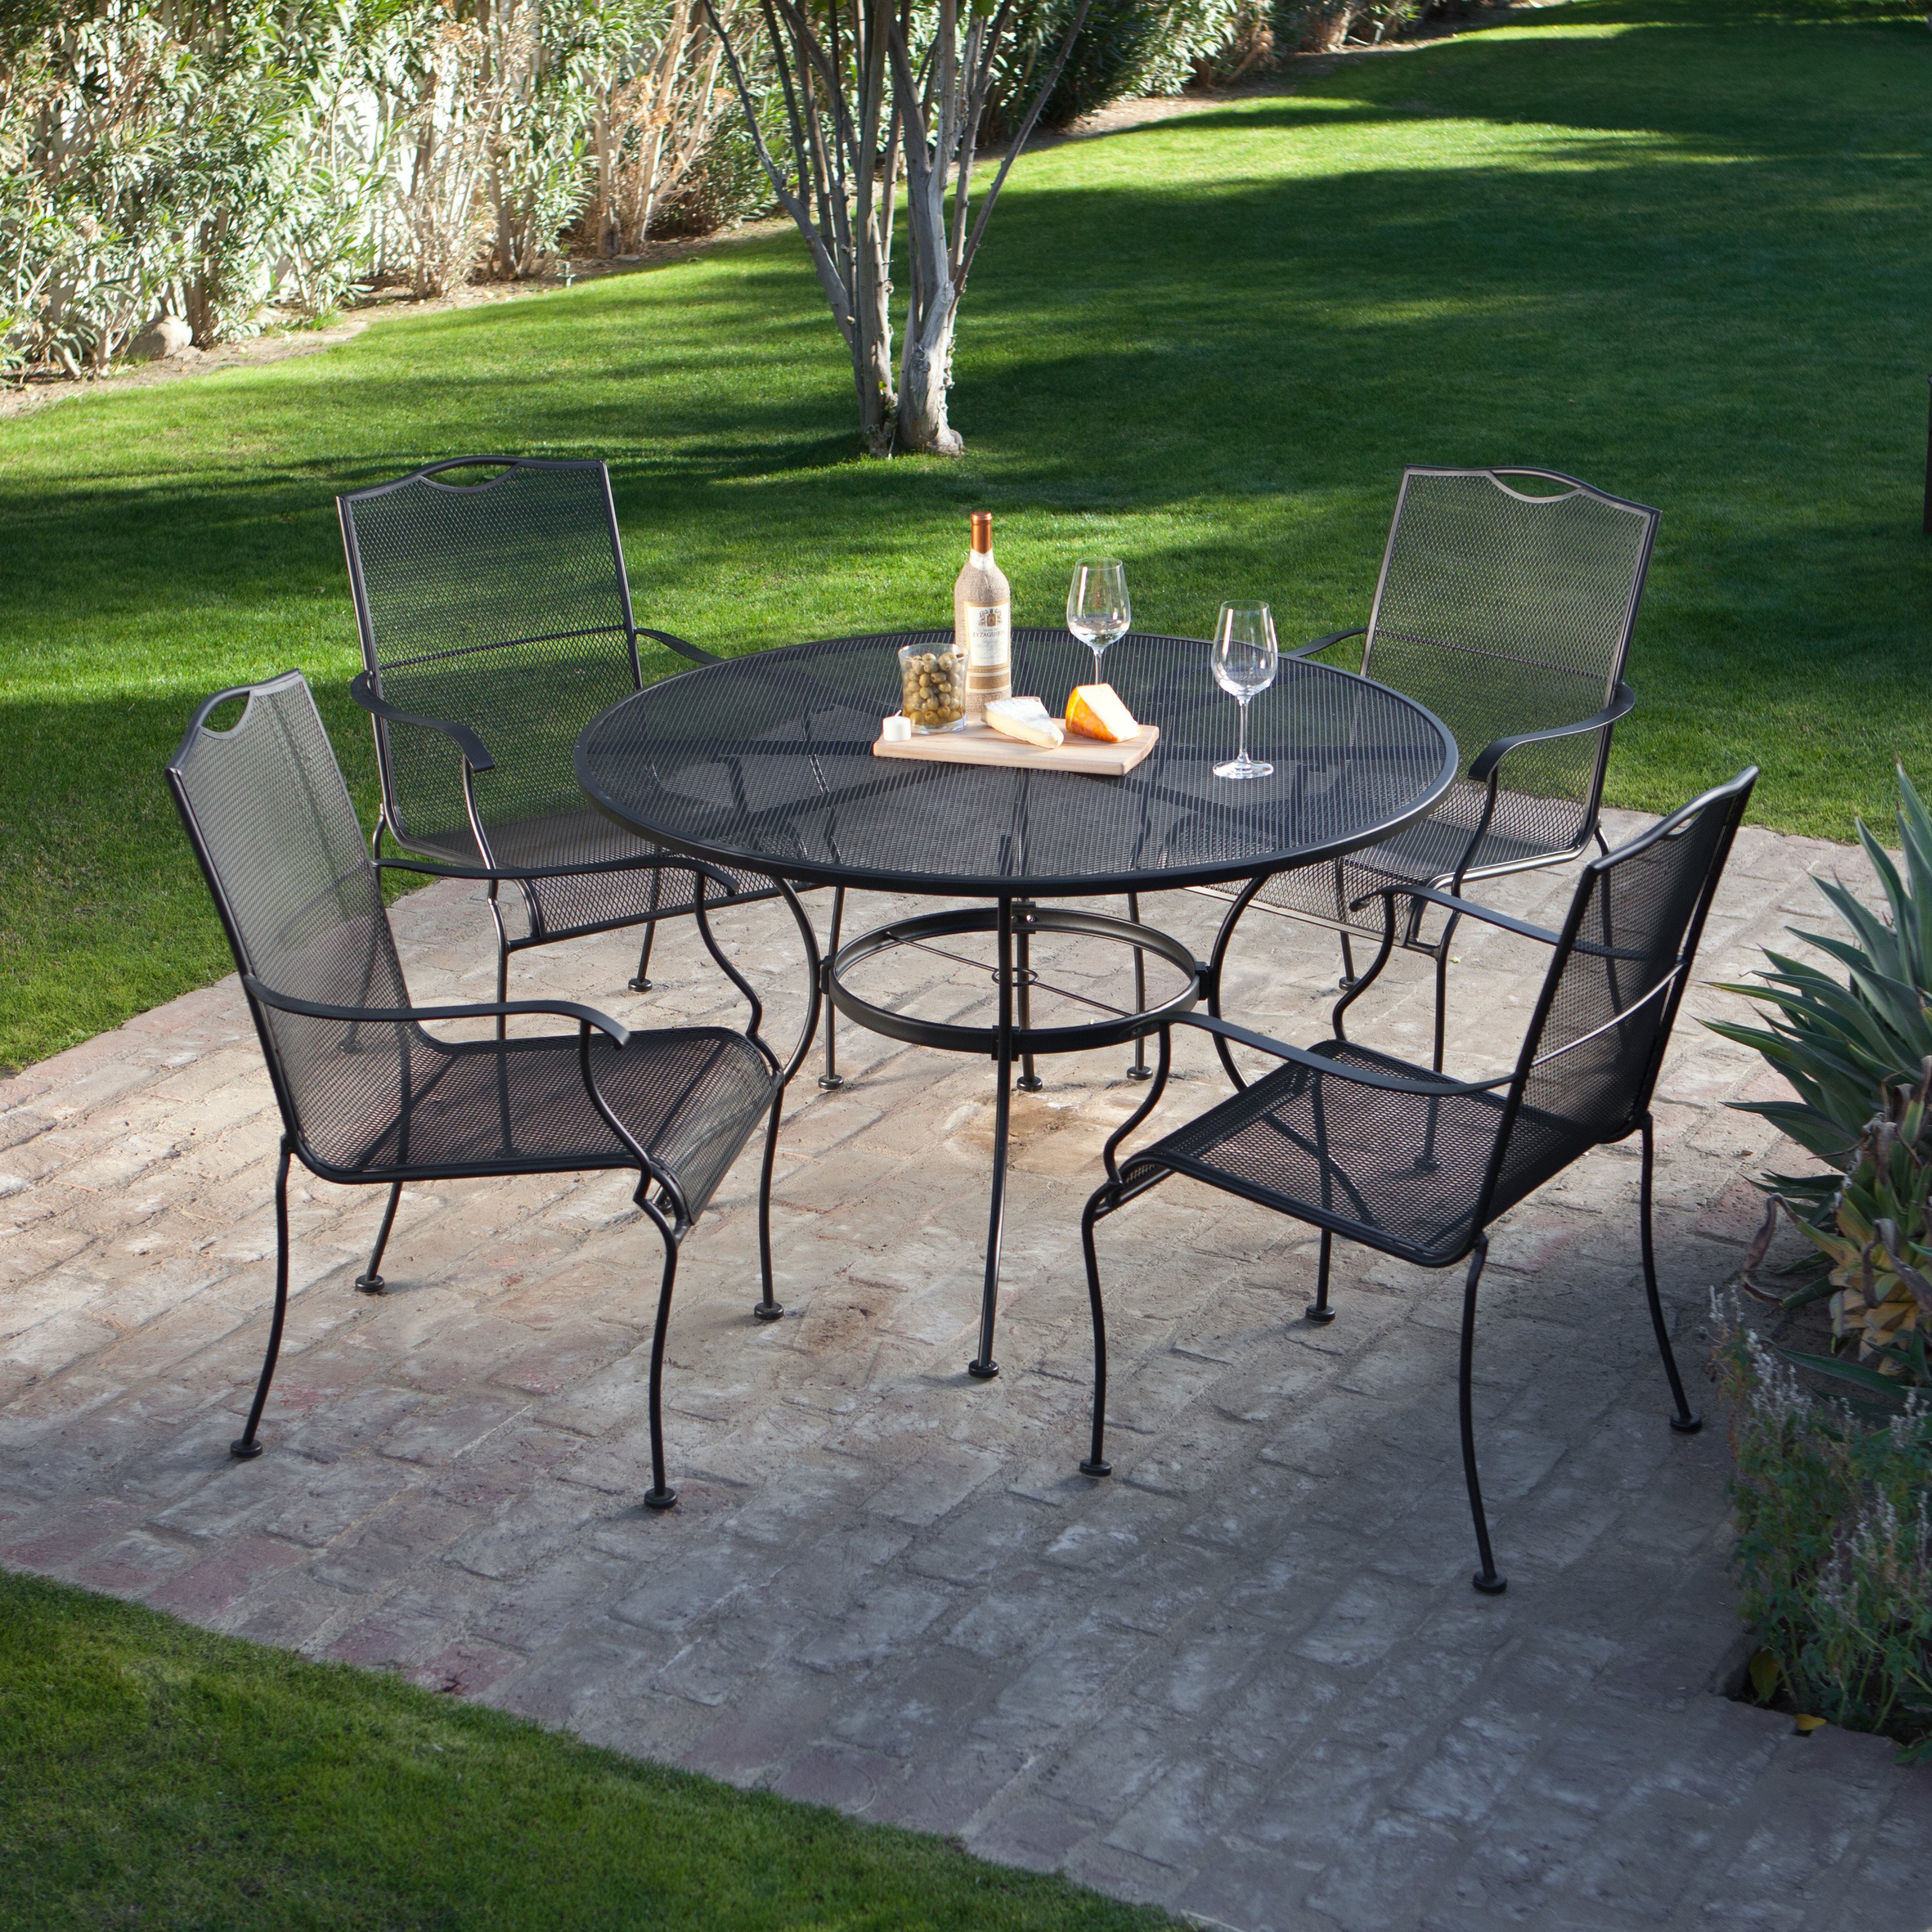 patio table and chairs outdoor innovation pacifica aluminum 7 piece patio dining set | hayneedle KFUNFLB